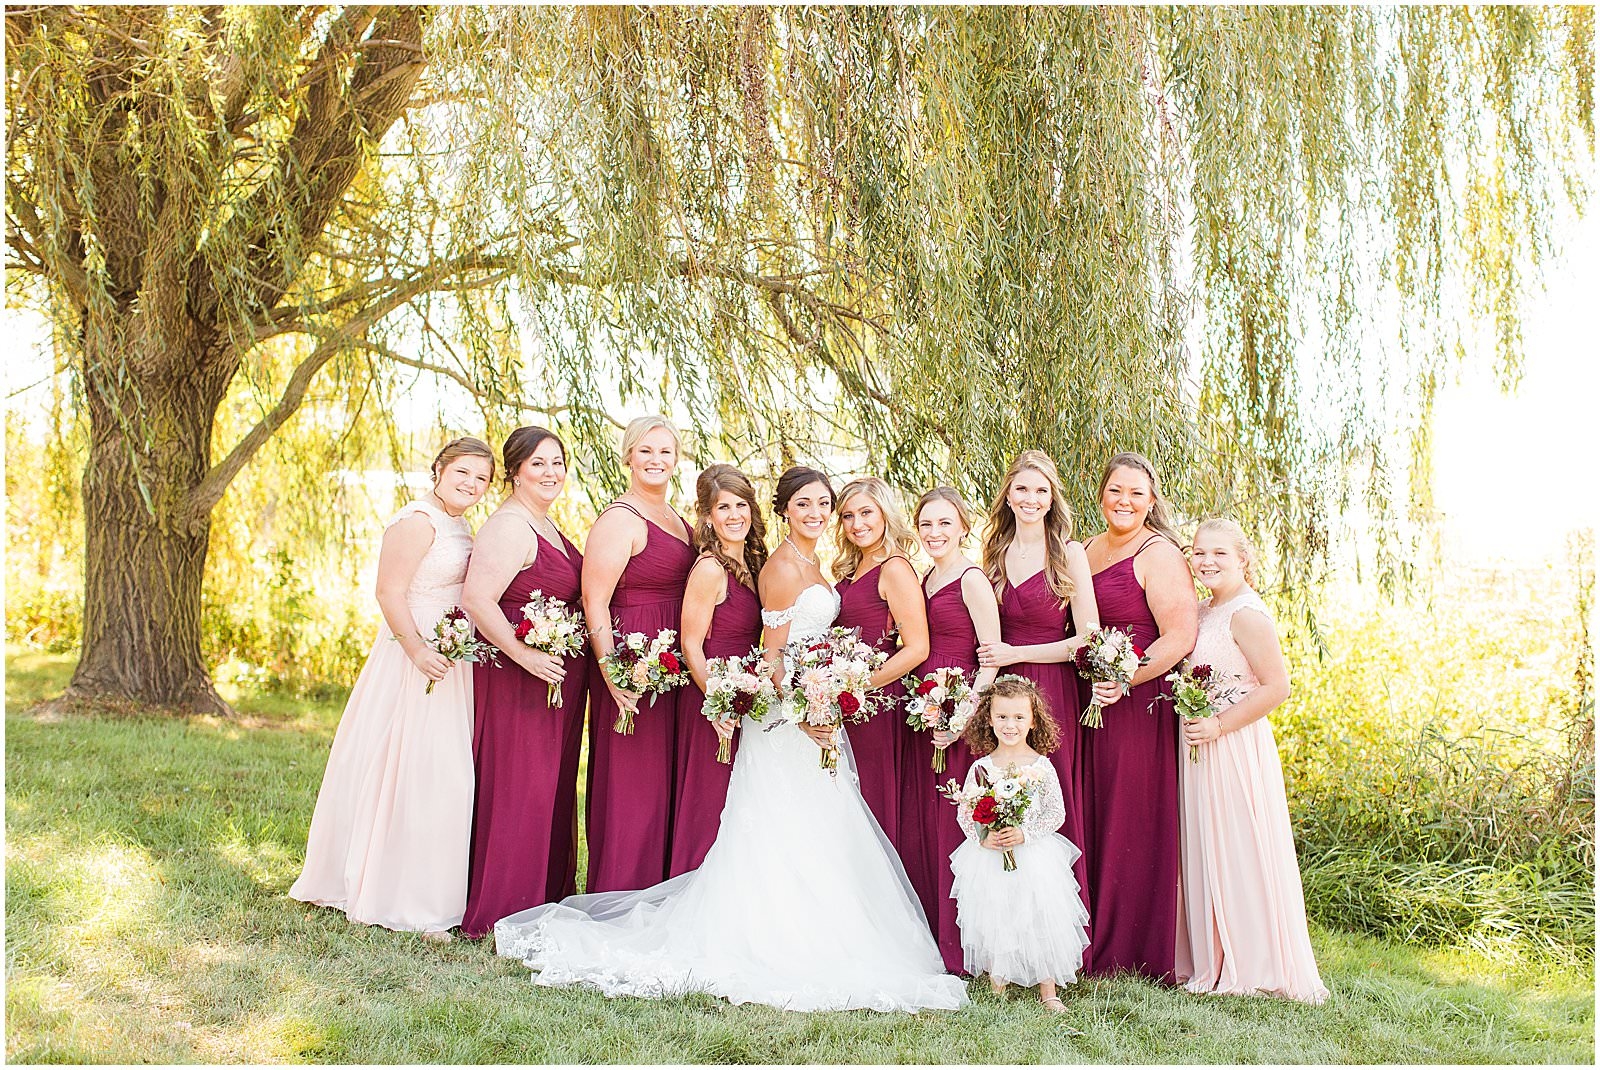 A Stunning Fall Wedding in Indianapolis, IN |. Sally and Andrew | Bret and Brandie Photography 0084.jpg